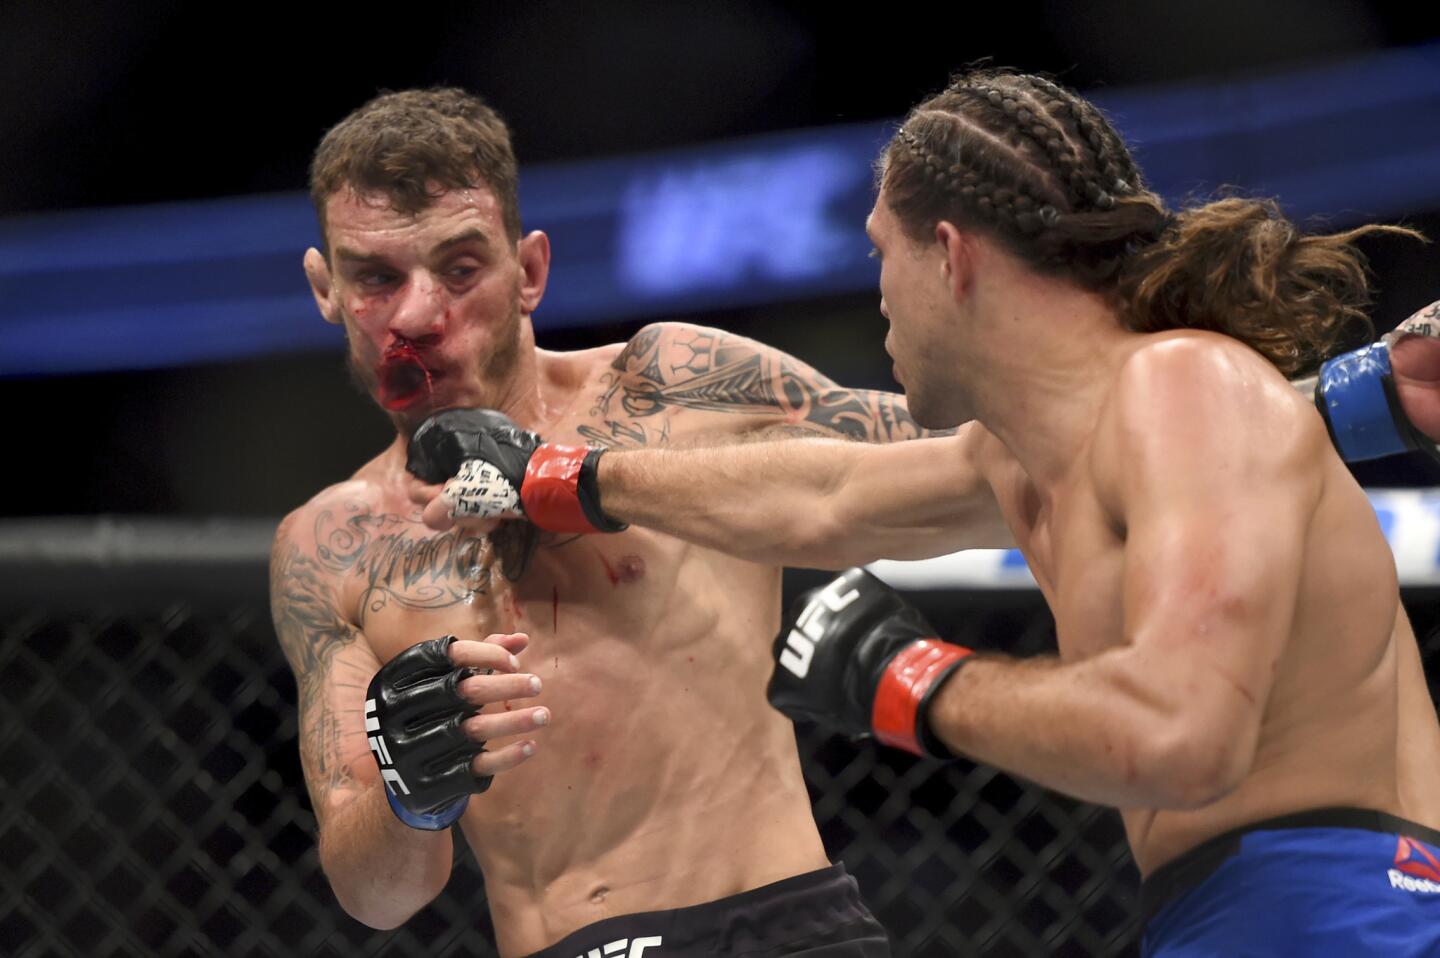 Brian Ortega, right, connects with Renato Moicano in the featherweight bout at UFC 214 in Anaheim, Calif., Saturday, July 29, 2017. (Hans Gutknecht /Los Angeles Daily News via AP)